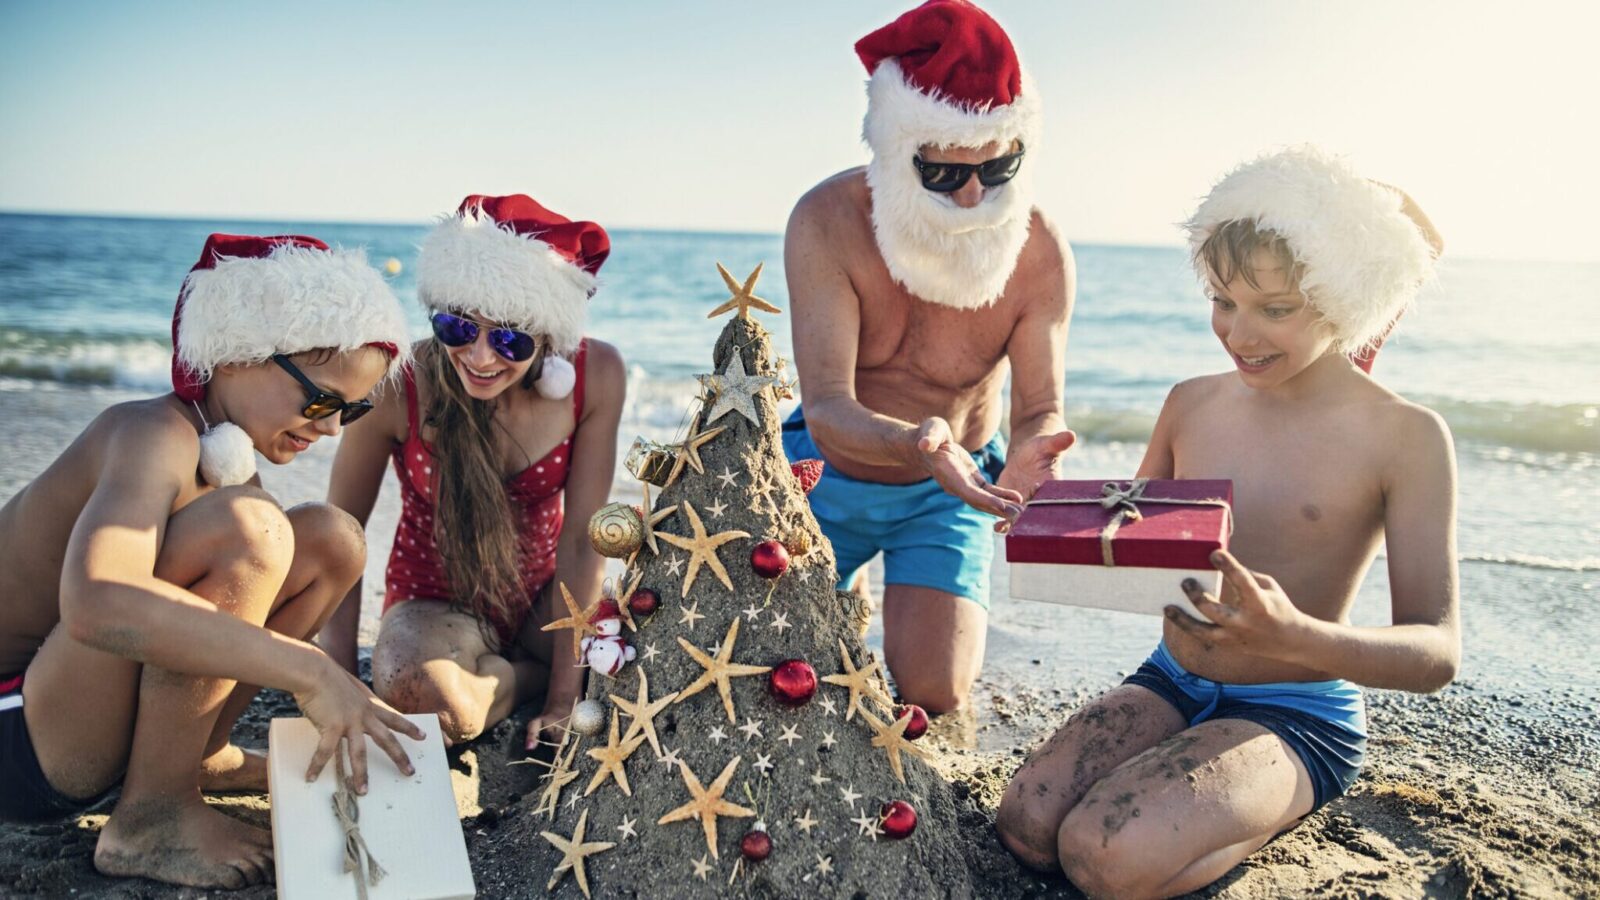 Father and three children opening gifts on the beach by a and Christmas tree.